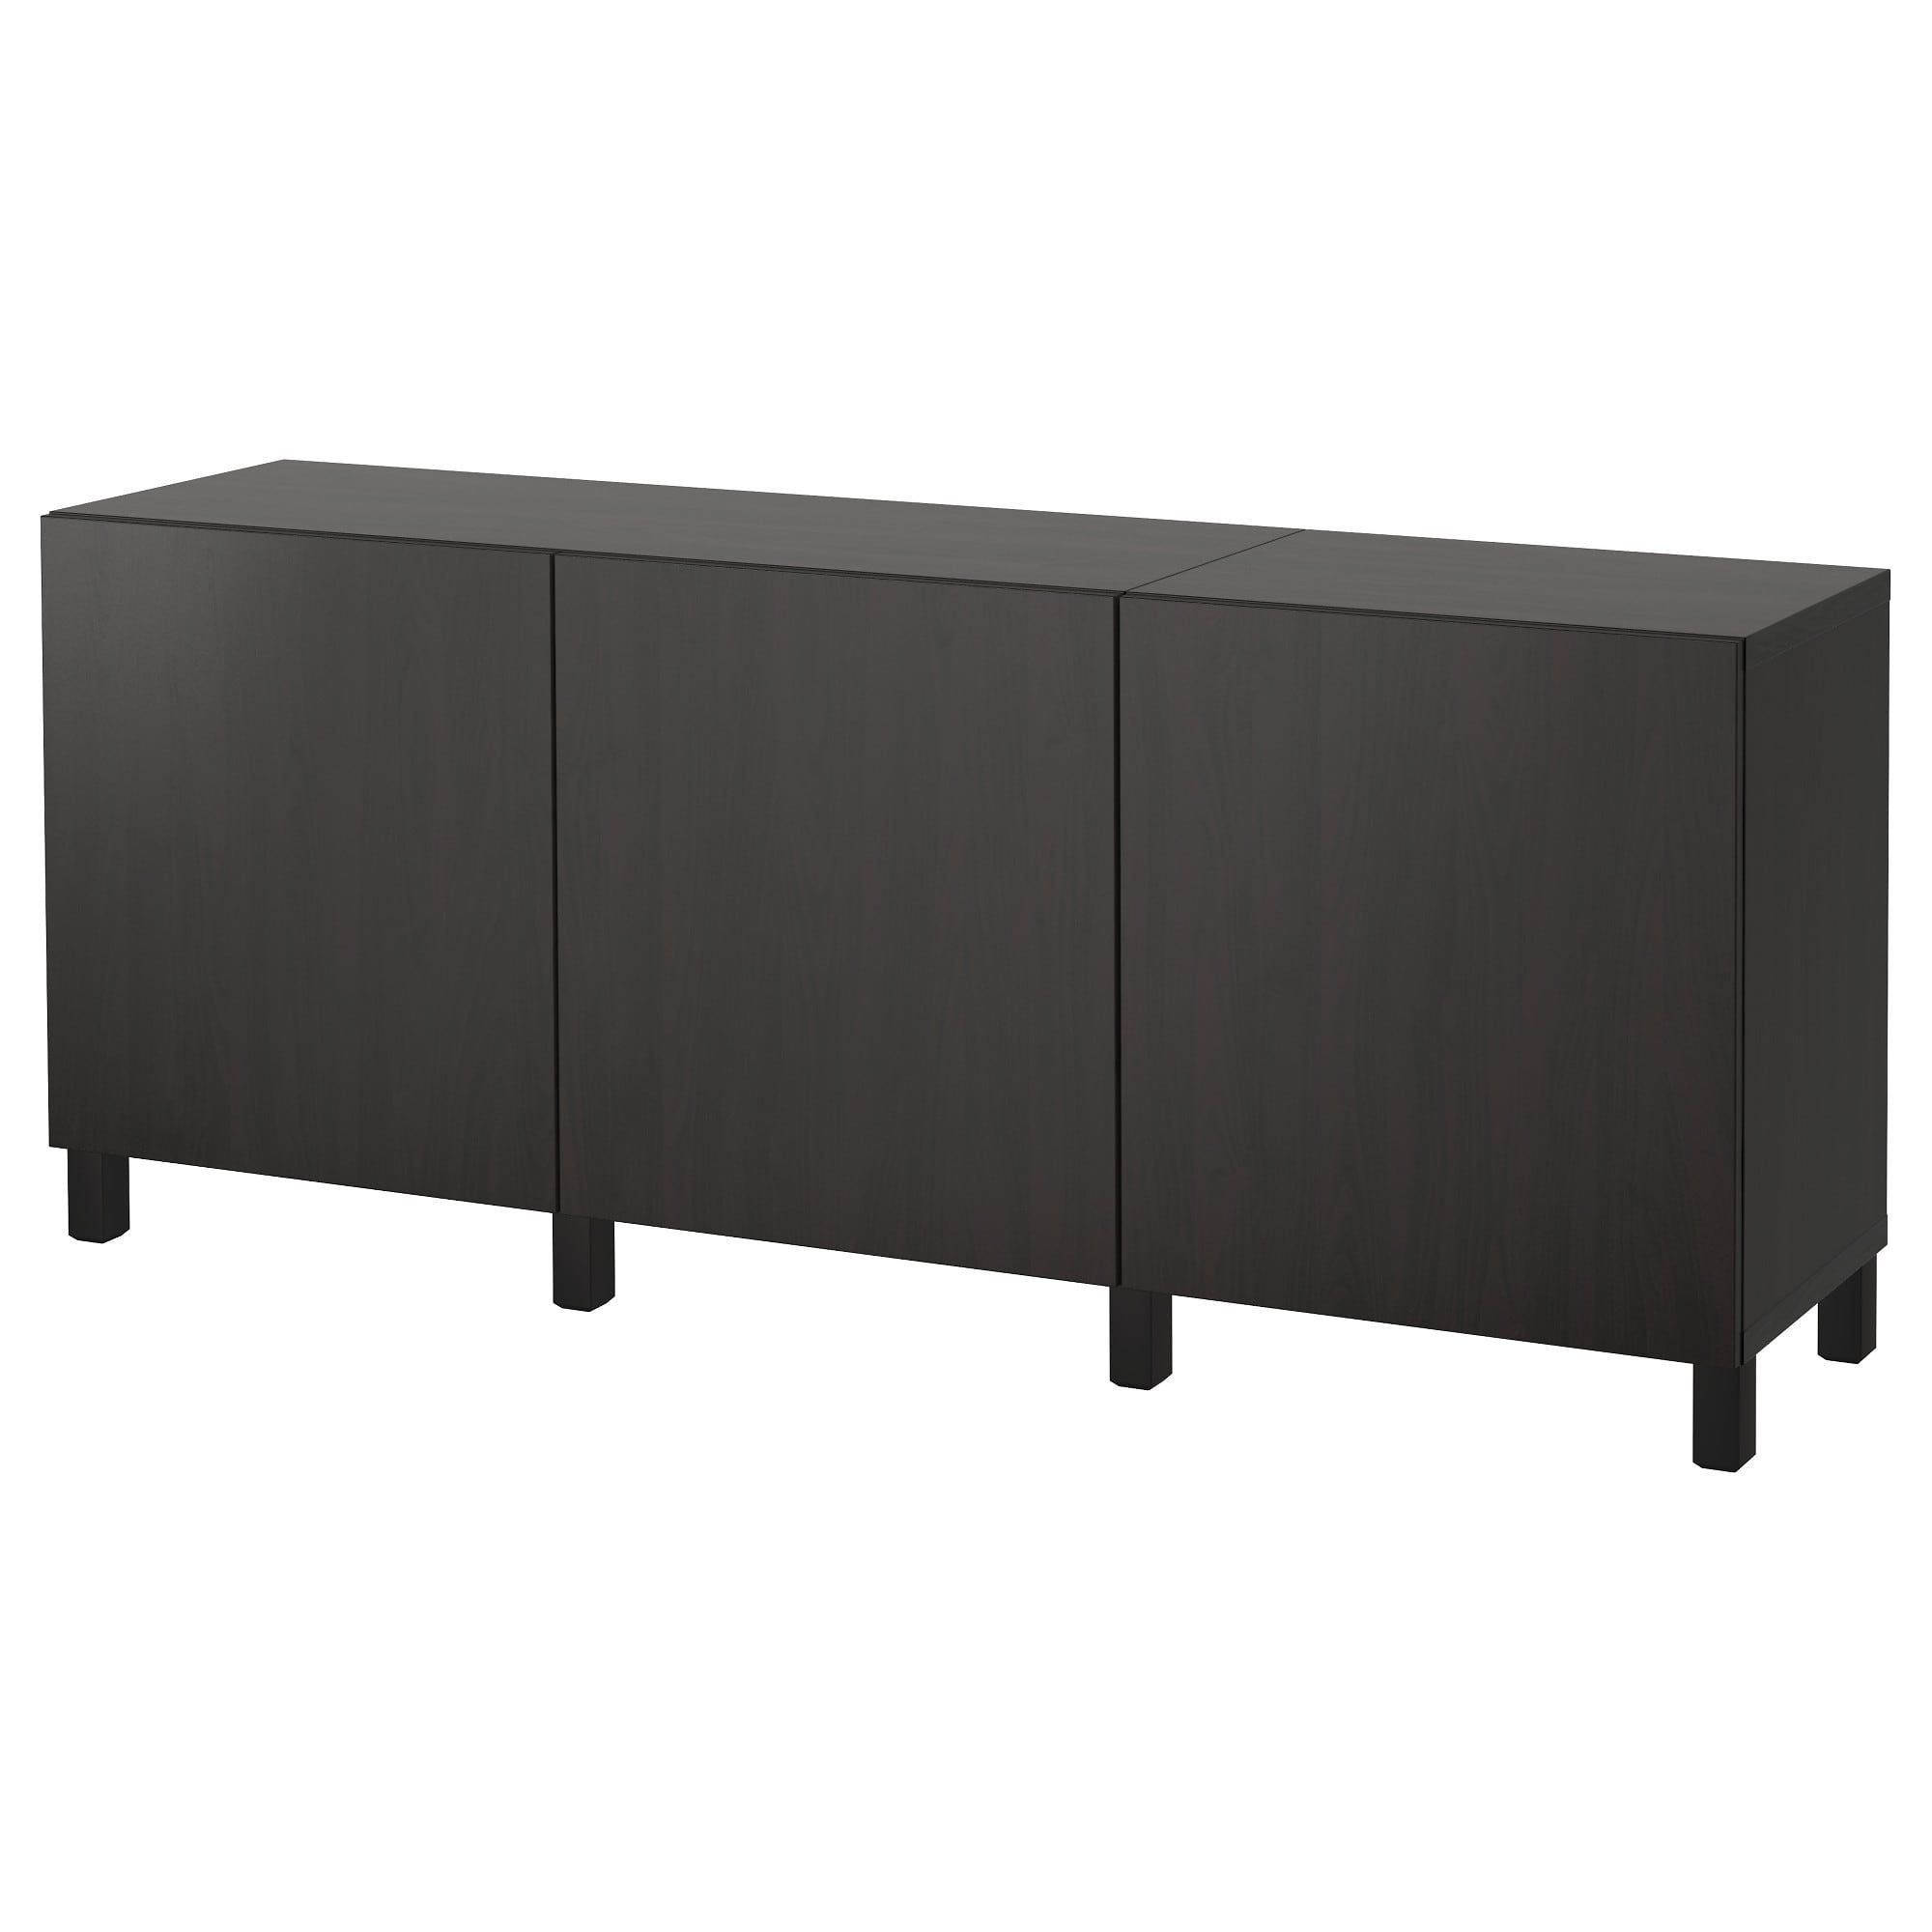 Storage Combination With Doors Bestå Lappviken Black Brown Intended For 3 Drawer Black Storage Buffets (View 10 of 30)